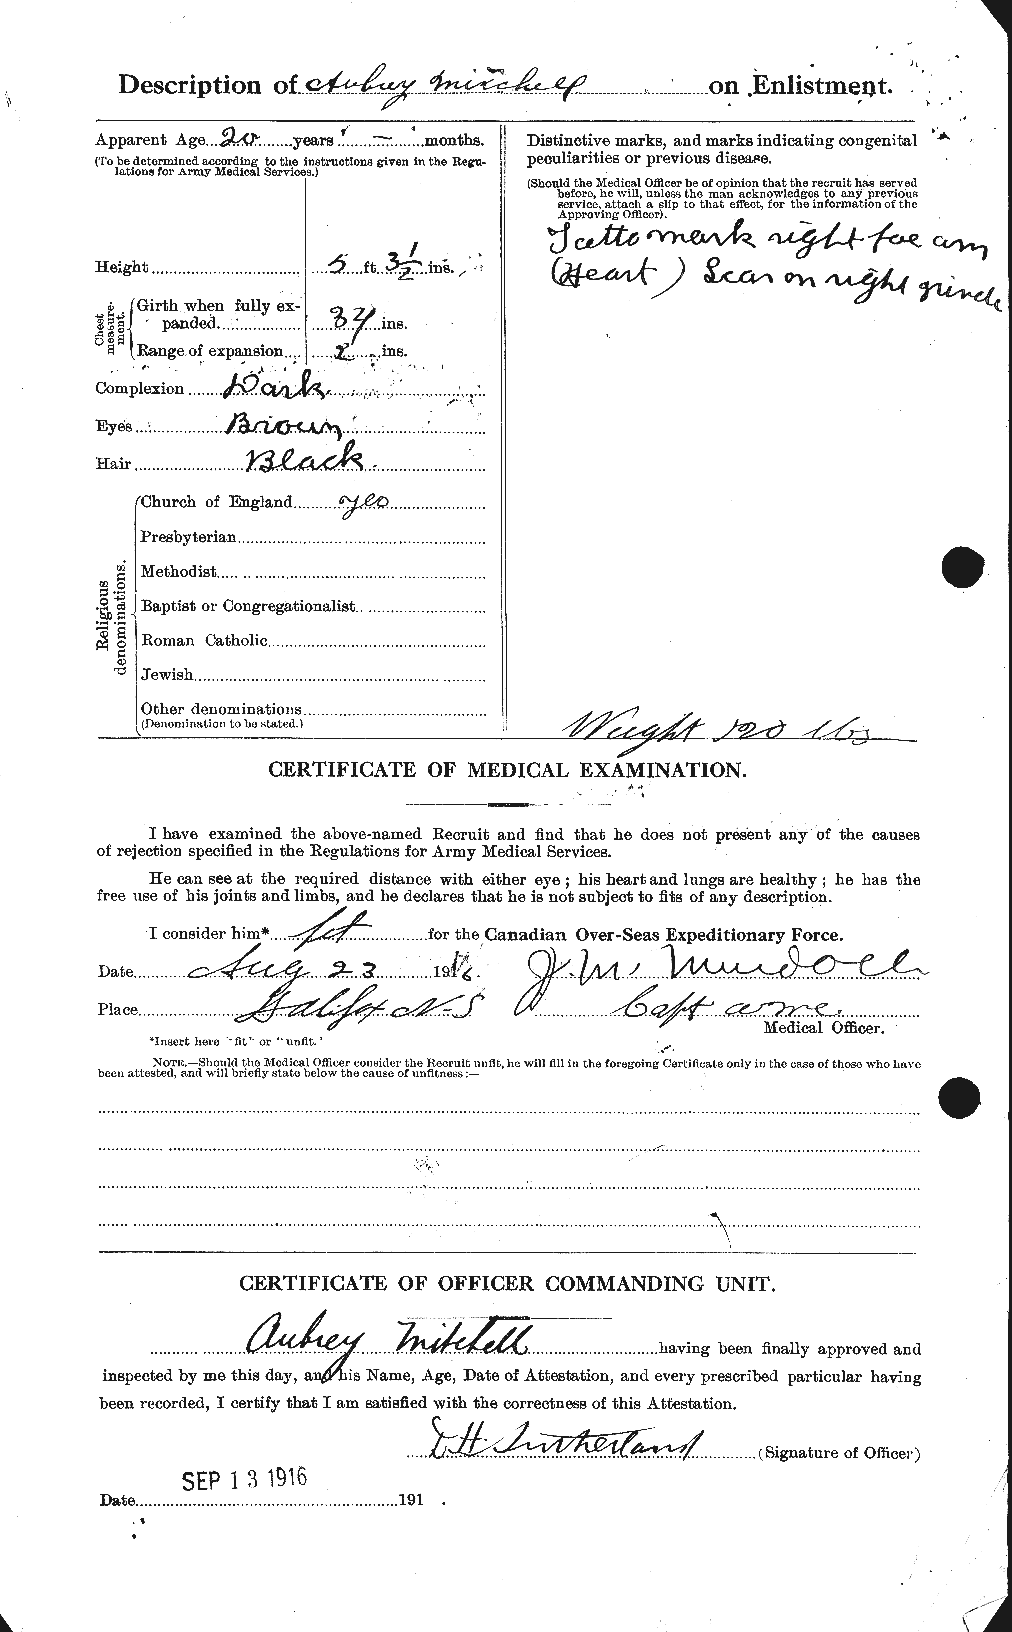 Personnel Records of the First World War - CEF 496077b